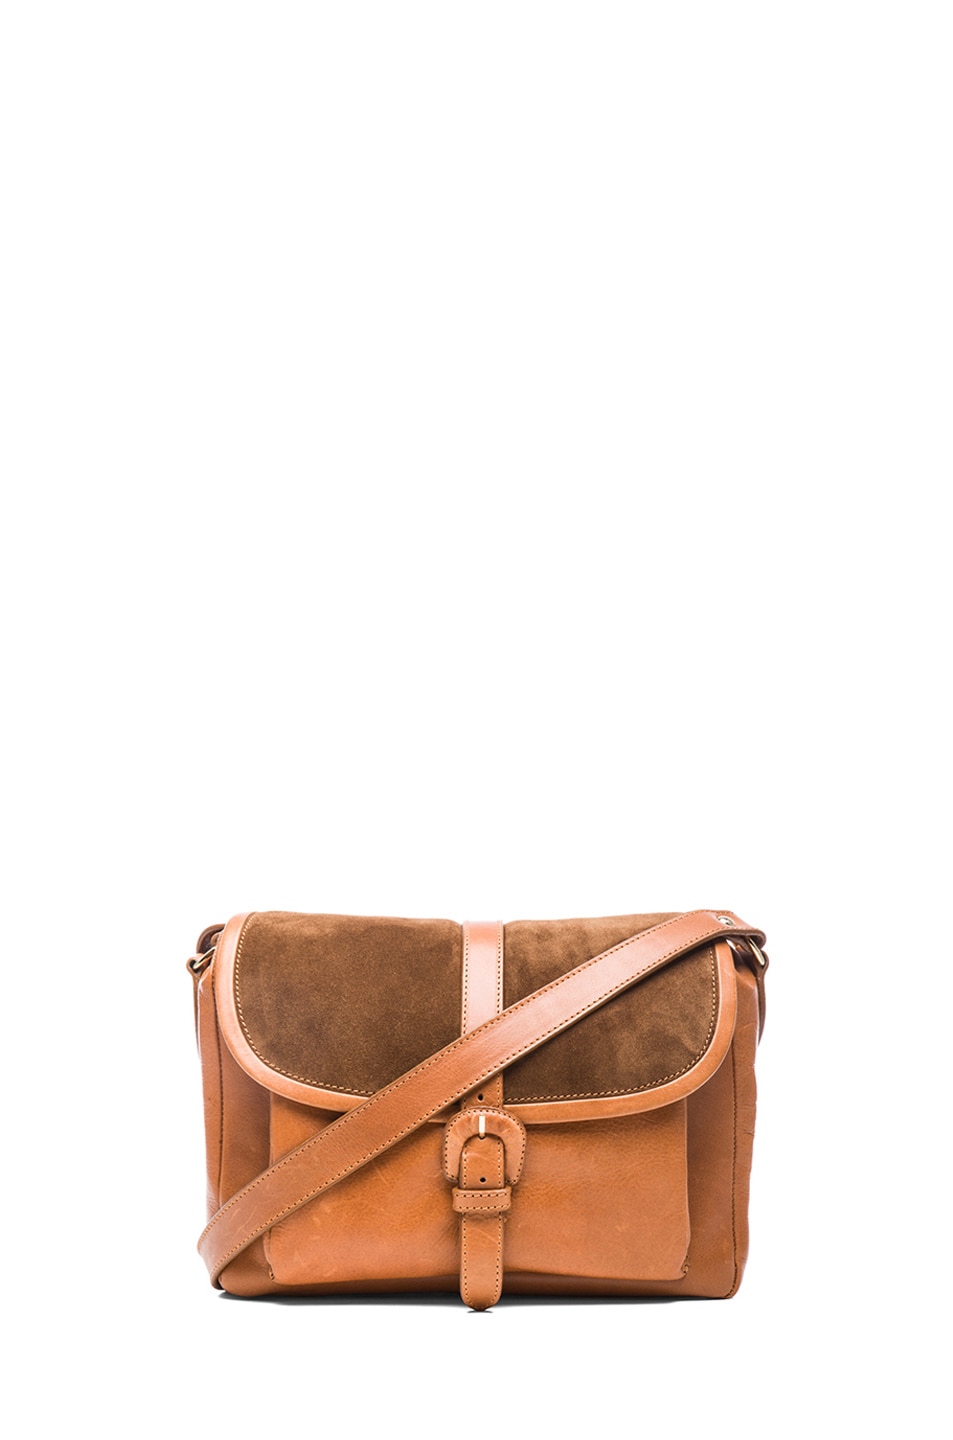 Image 1 of A.P.C. Leather and Suede Bag in Hazelnut